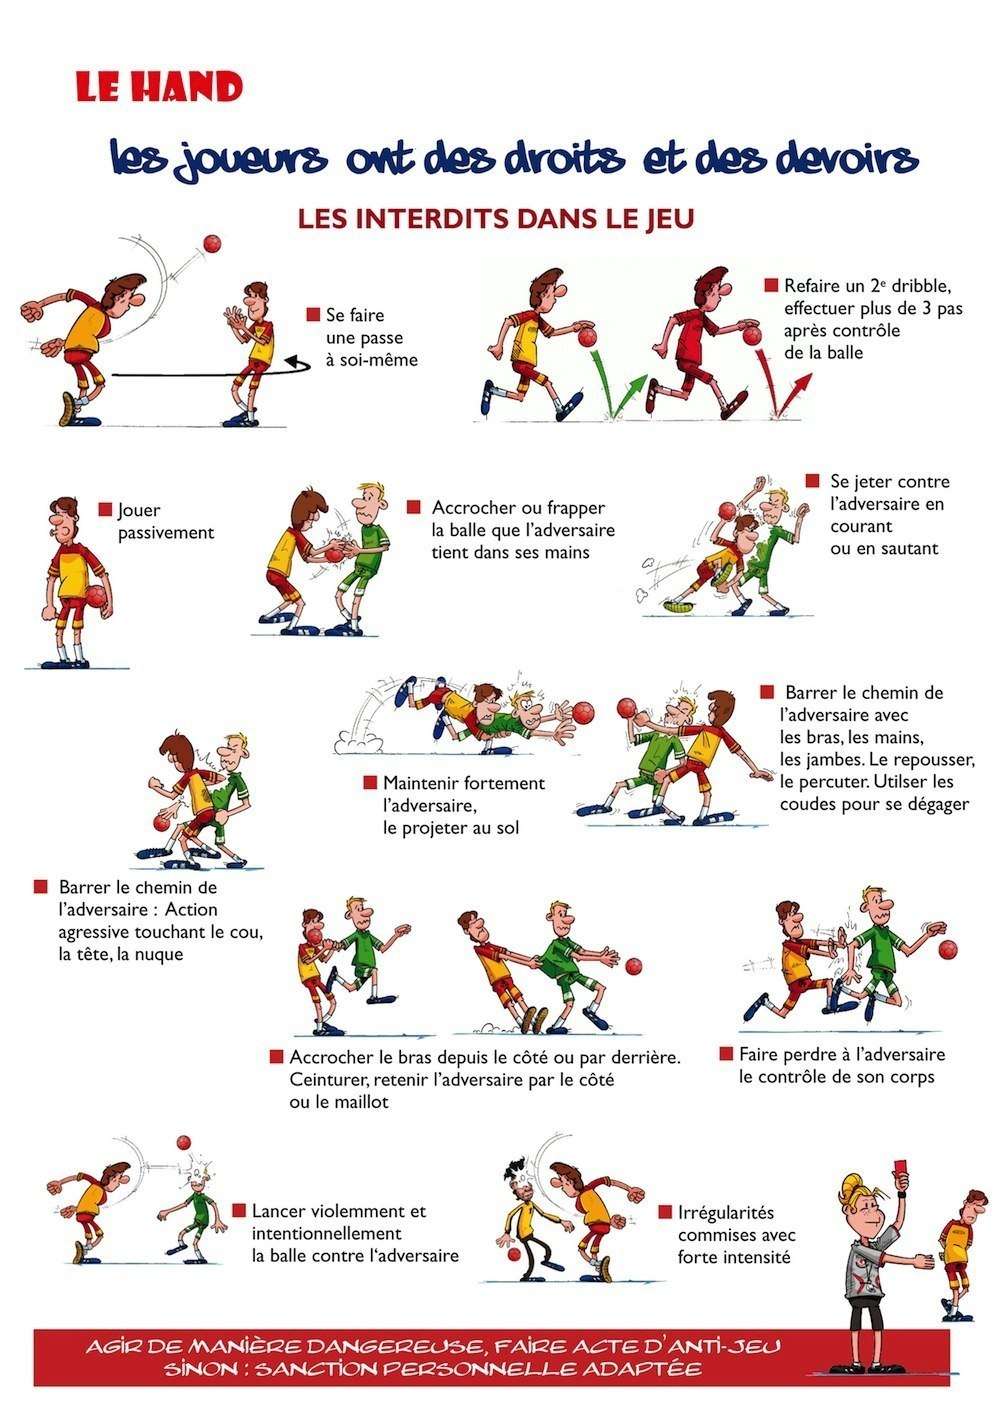 The fundamental rules for writing an article on handball and capturing the reader’s attention